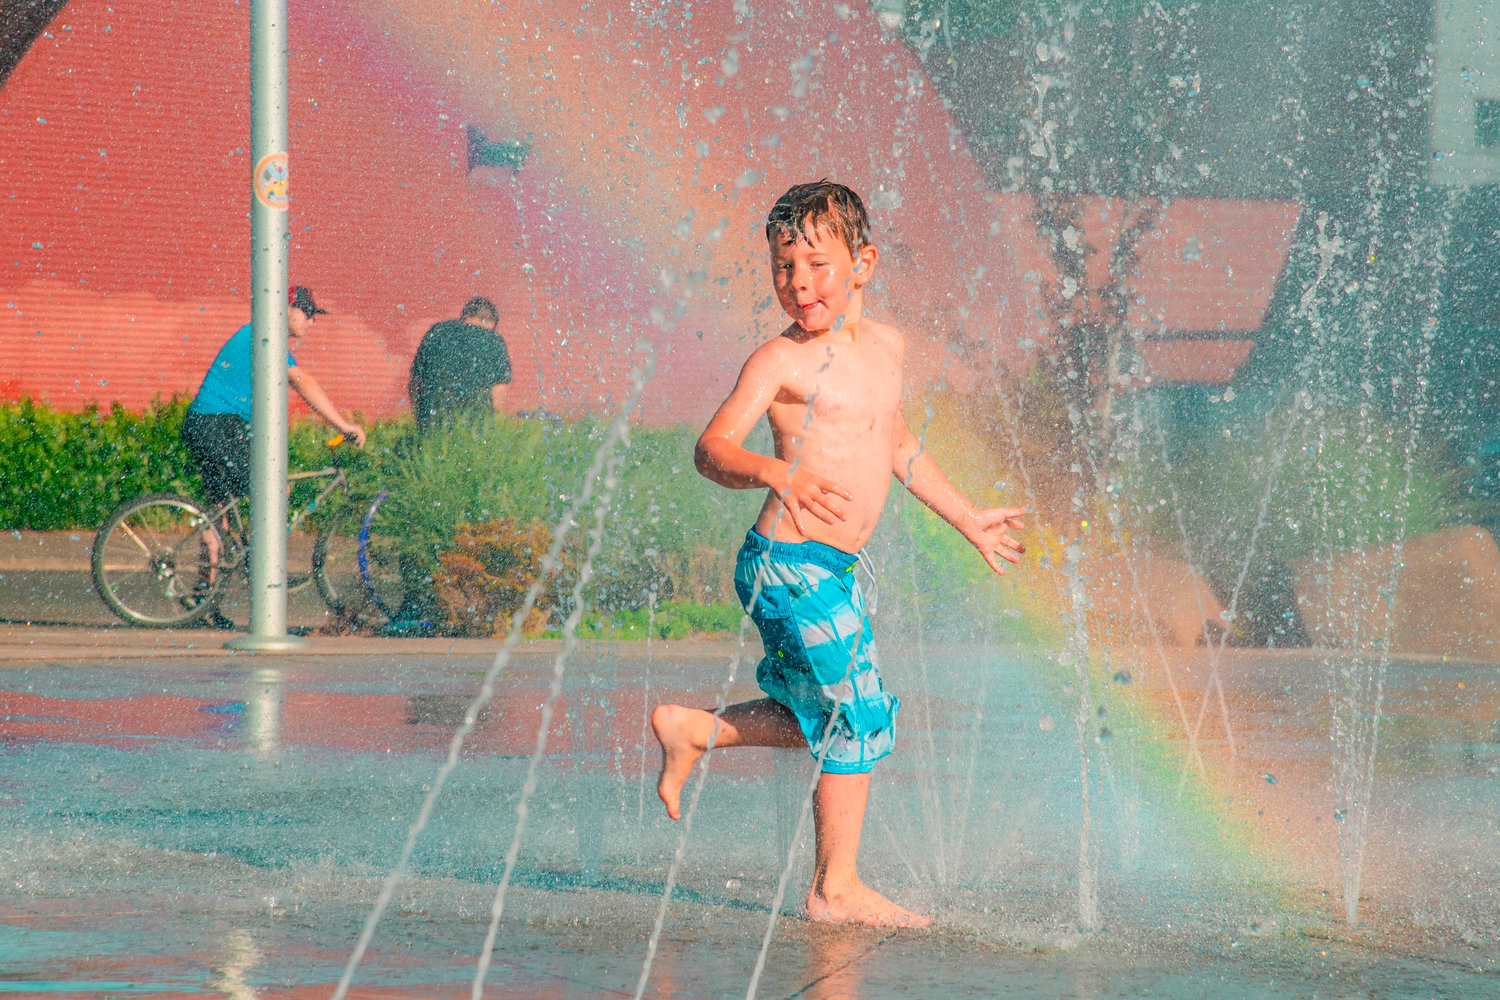 Tyrel Newkirk, 5, runs through streams of water to cool off at the Centralia splash park on Tuesday.